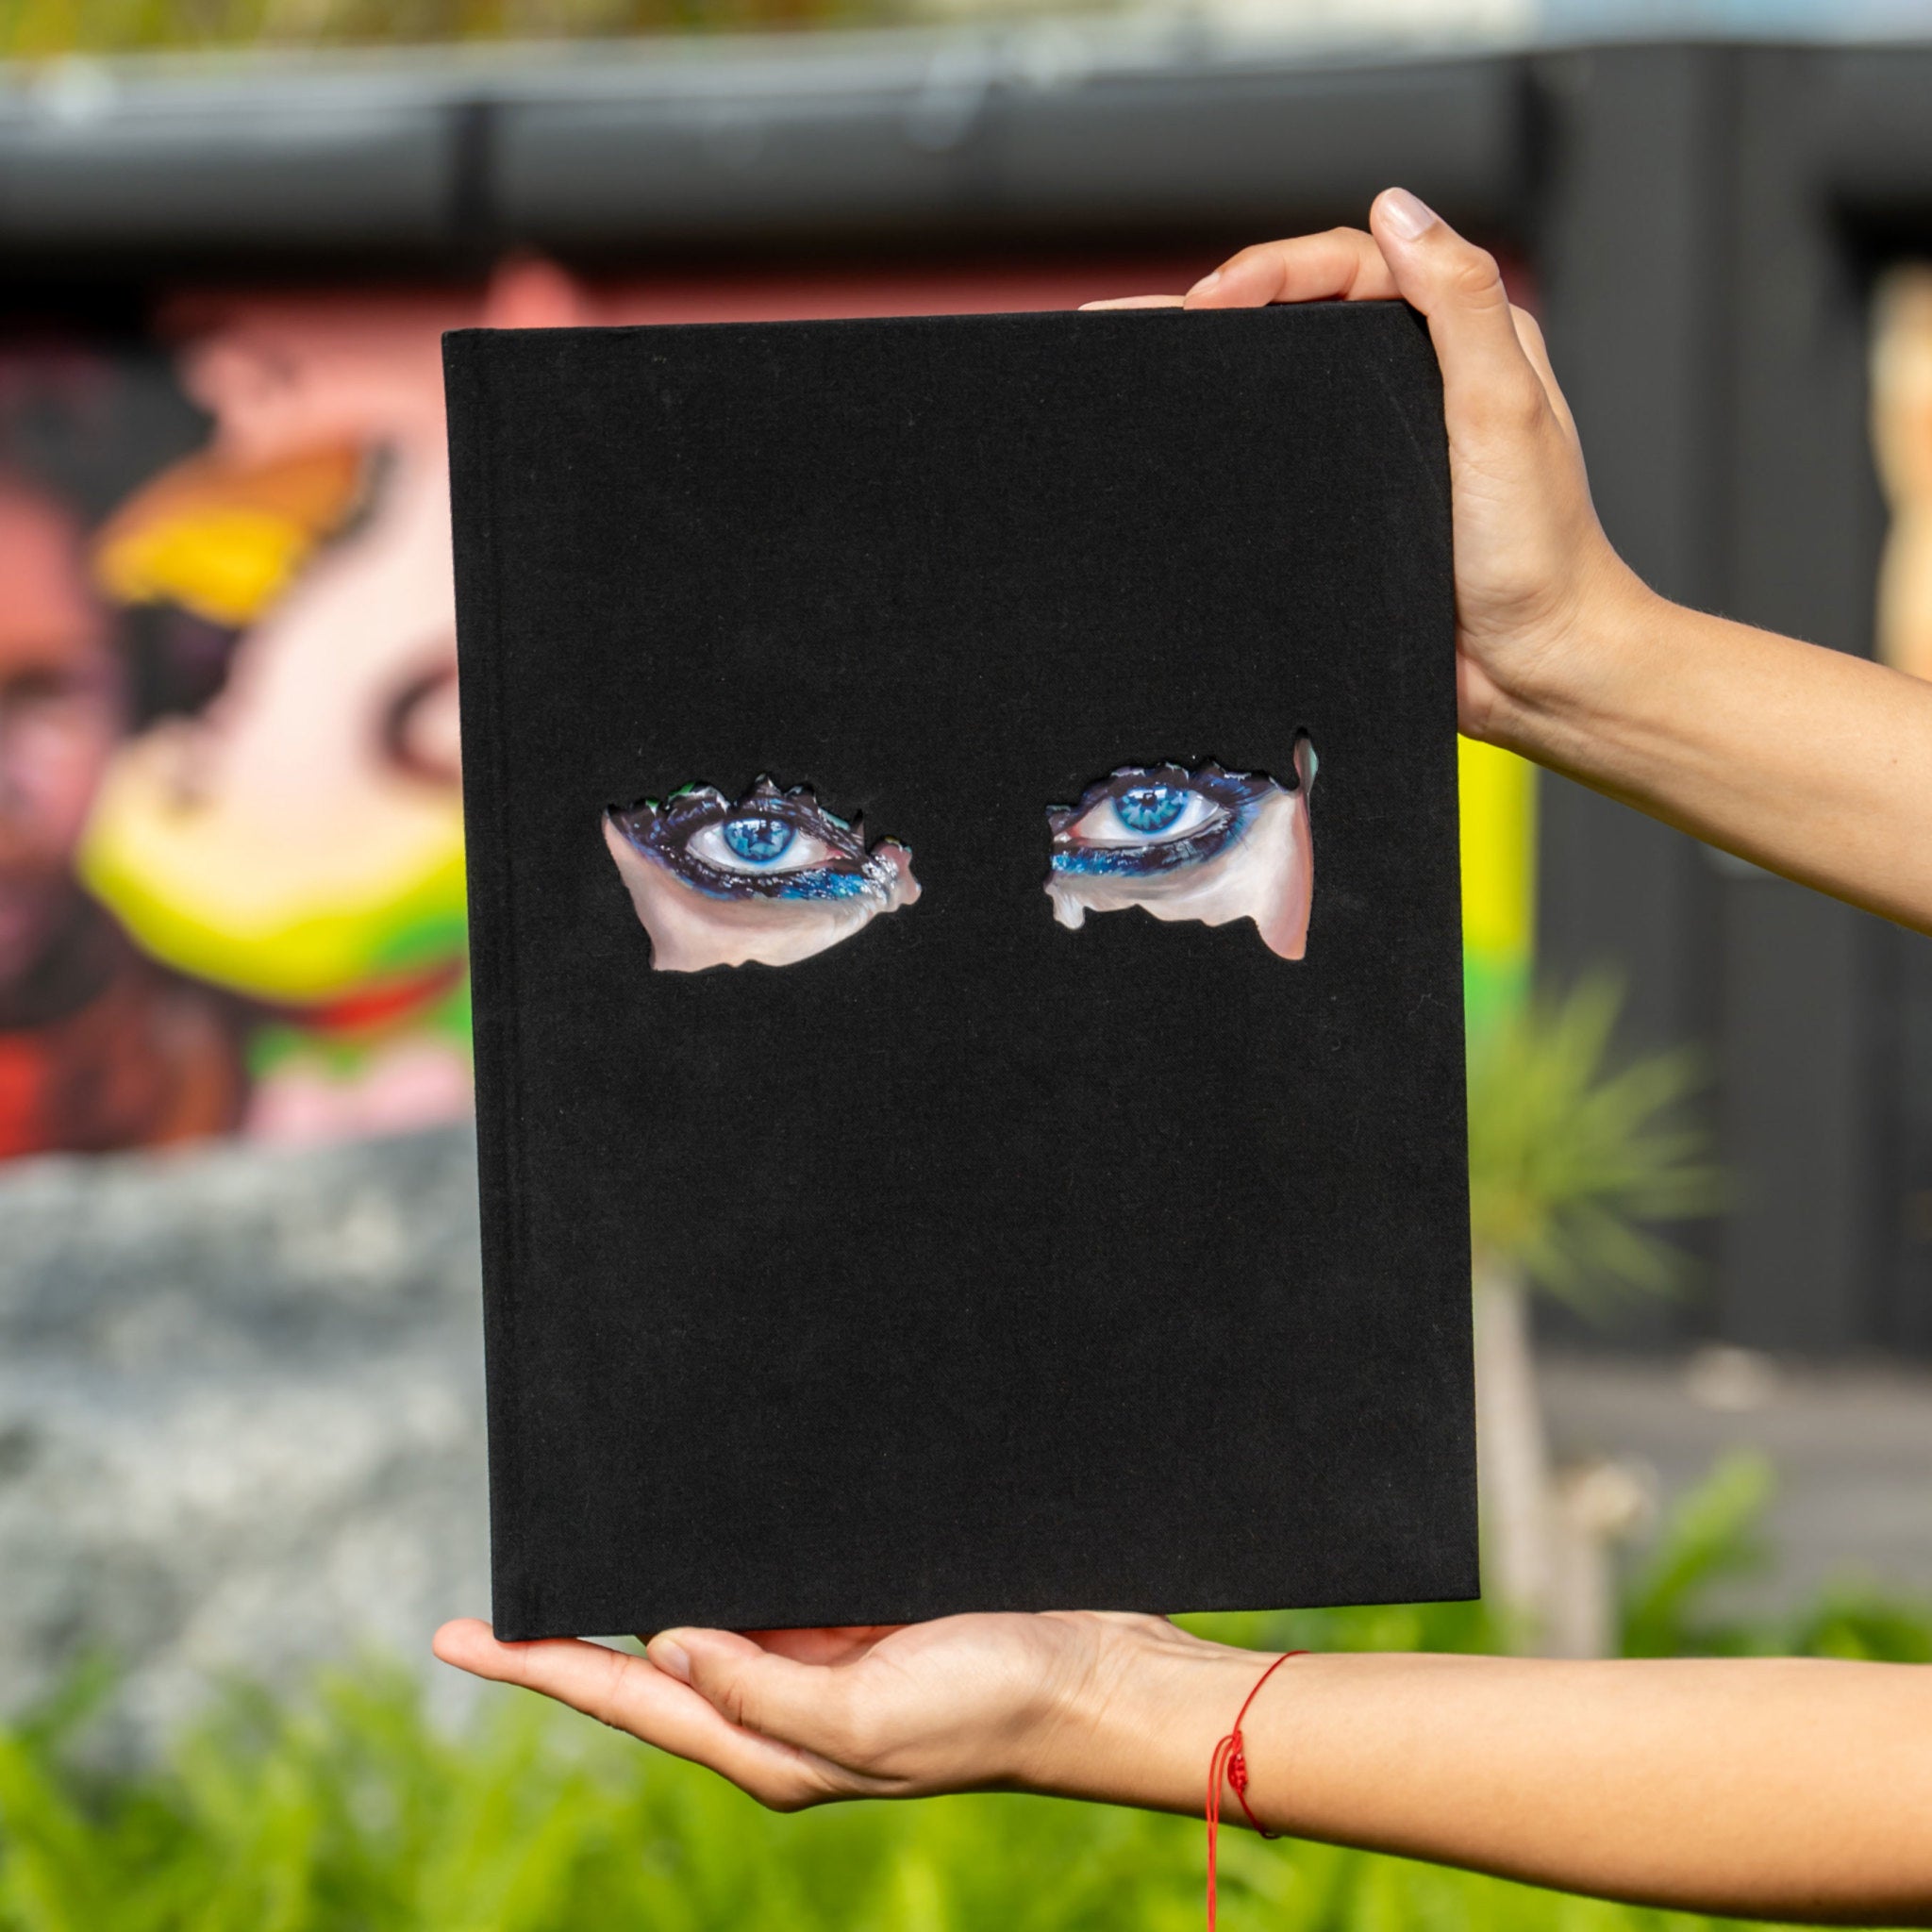 Explore Chanel's Legacy - The Must-Read Book of 2023 - The Wynwood Walls  Shop